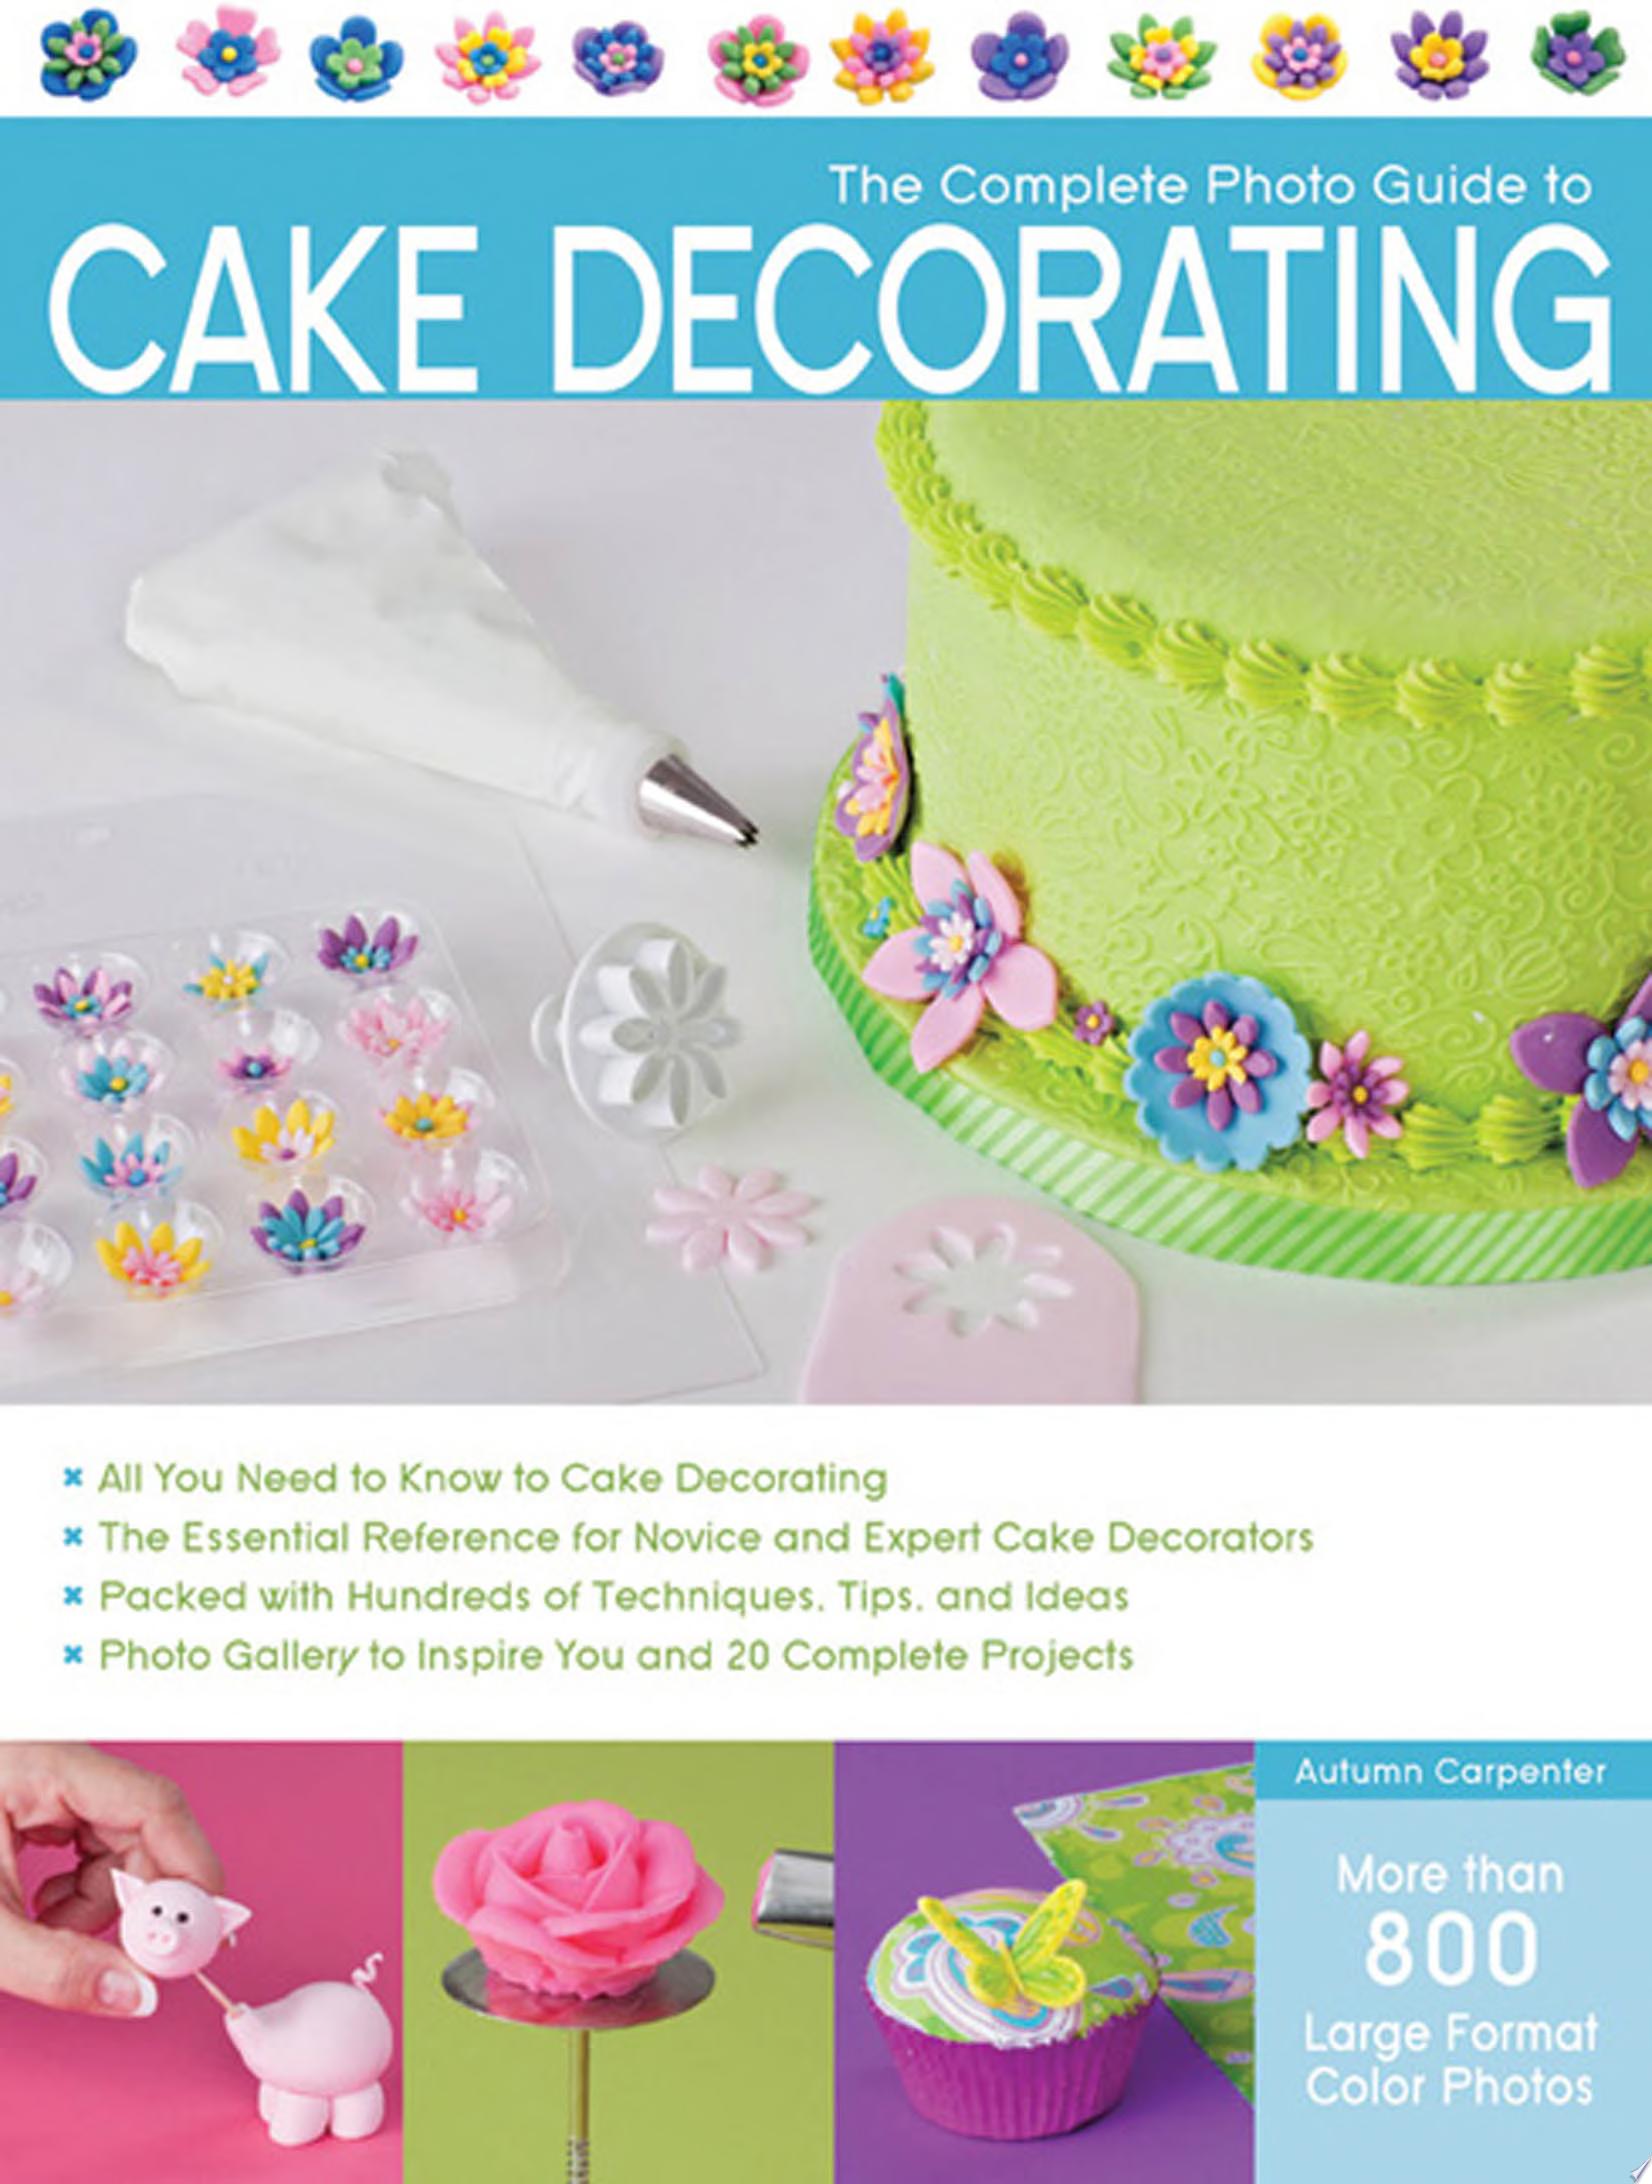 Image for "The Complete Photo Guide to Cake Decorating"